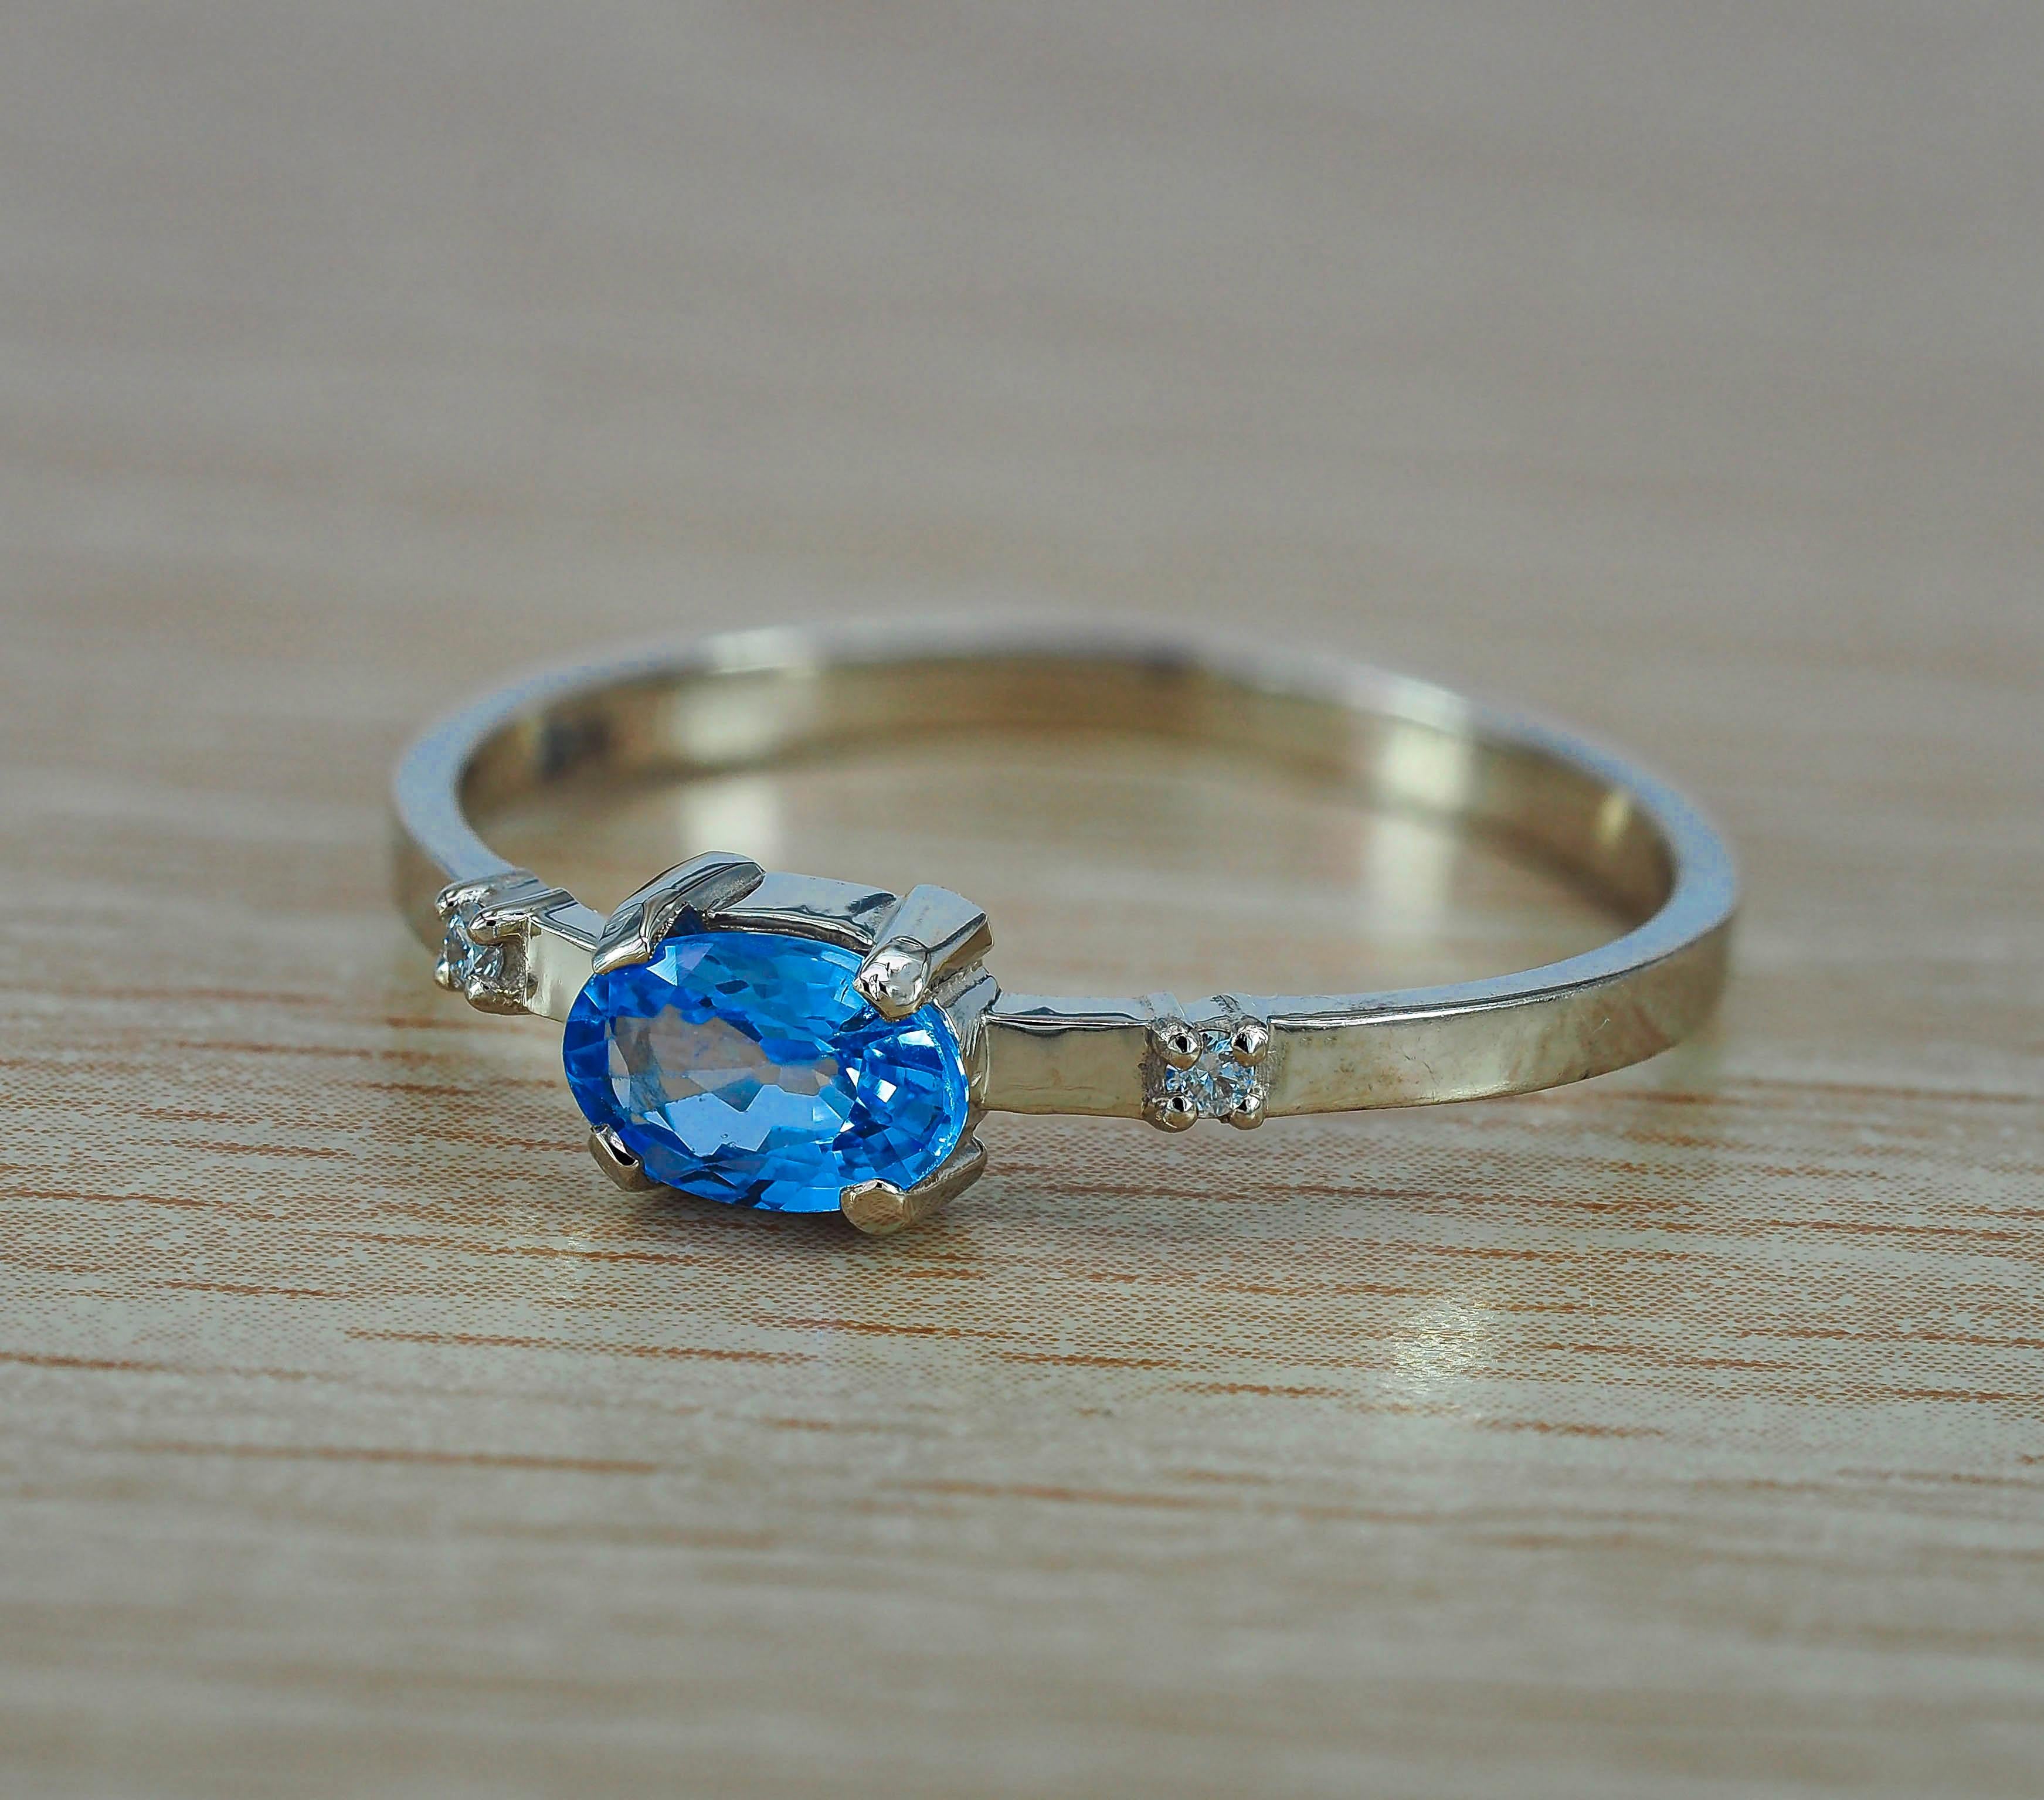 For Sale:  14k Gold Ring with Sapphire and Diamonds 7